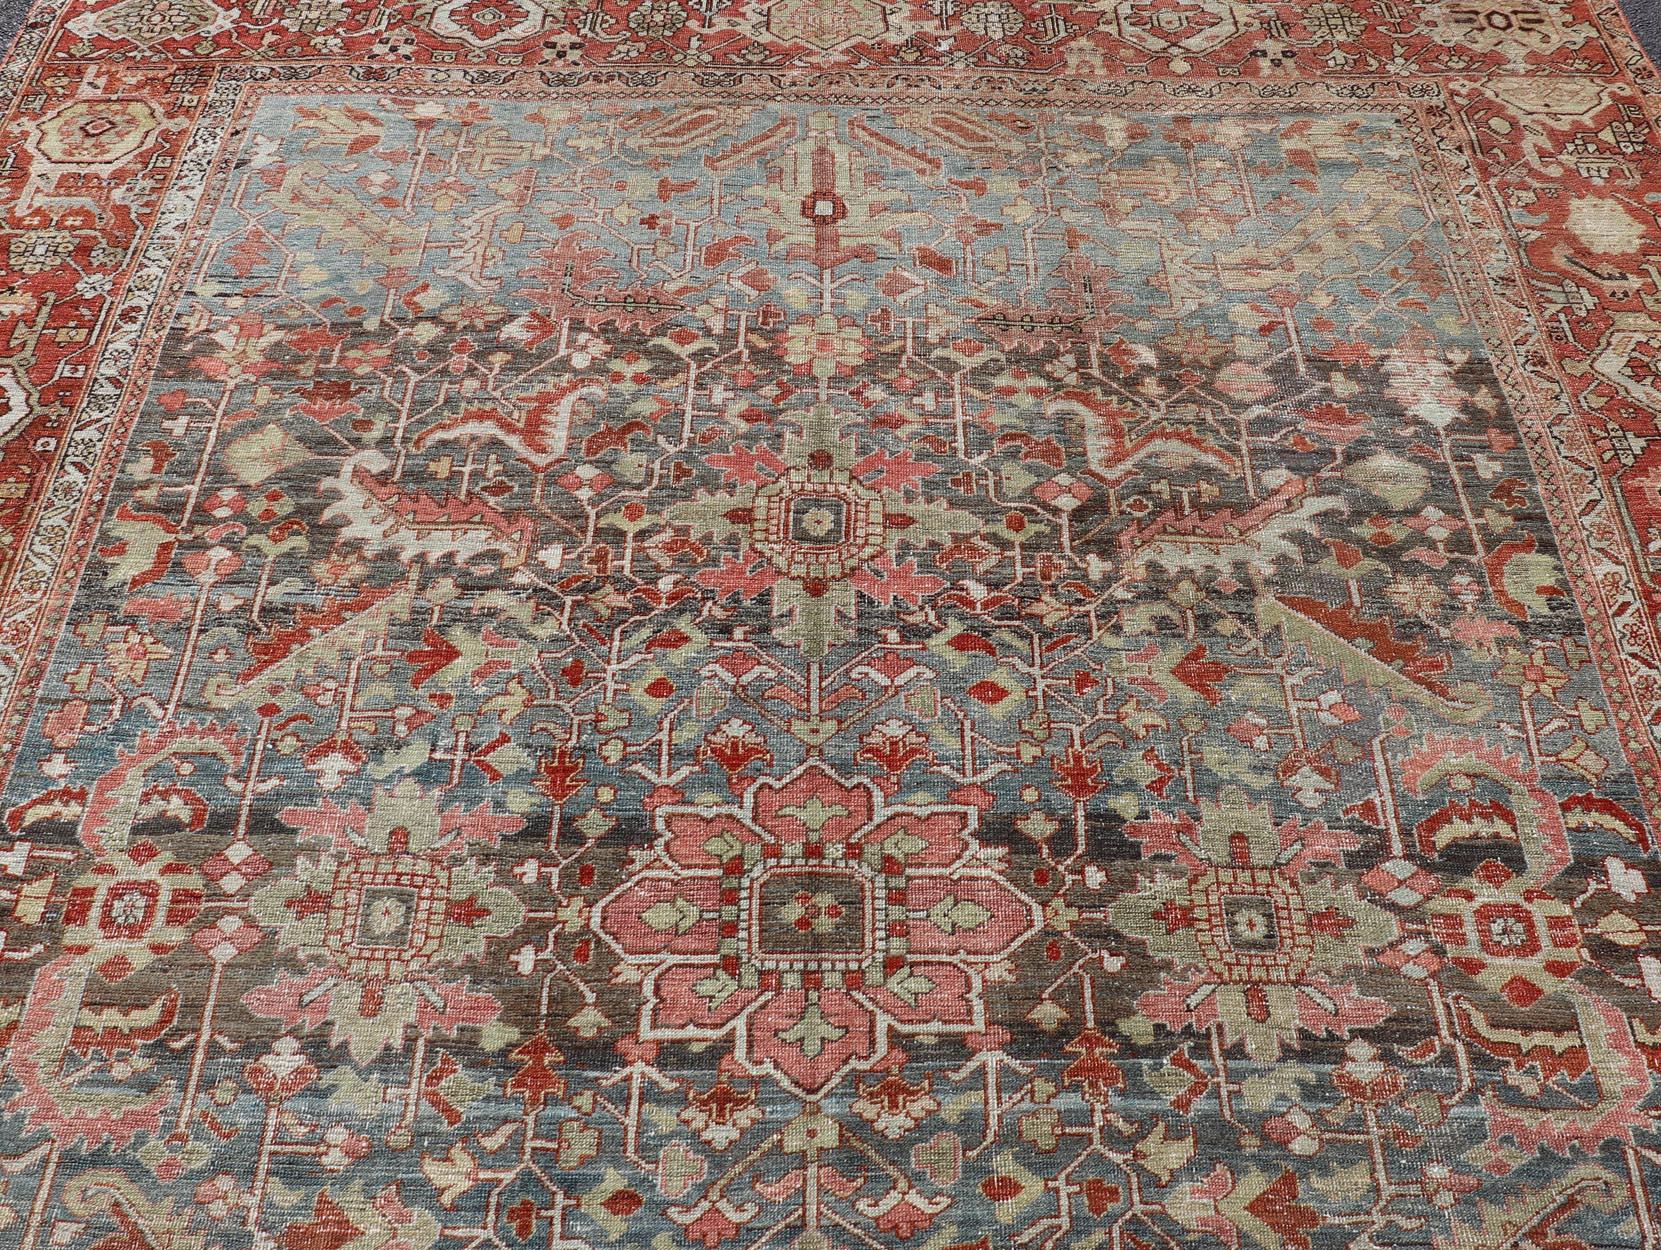 Persian Antique Serapi Rug with All-Over Geometric Design in Gray-Blue and Red. Keivan Woven Arts / Rug / V21-0812-15487, country of origin / type: Iran /Serapi, circa 1900. 
Measures: 9'9 x 11'10 
This lovely Antique Serapi rug, hailing from